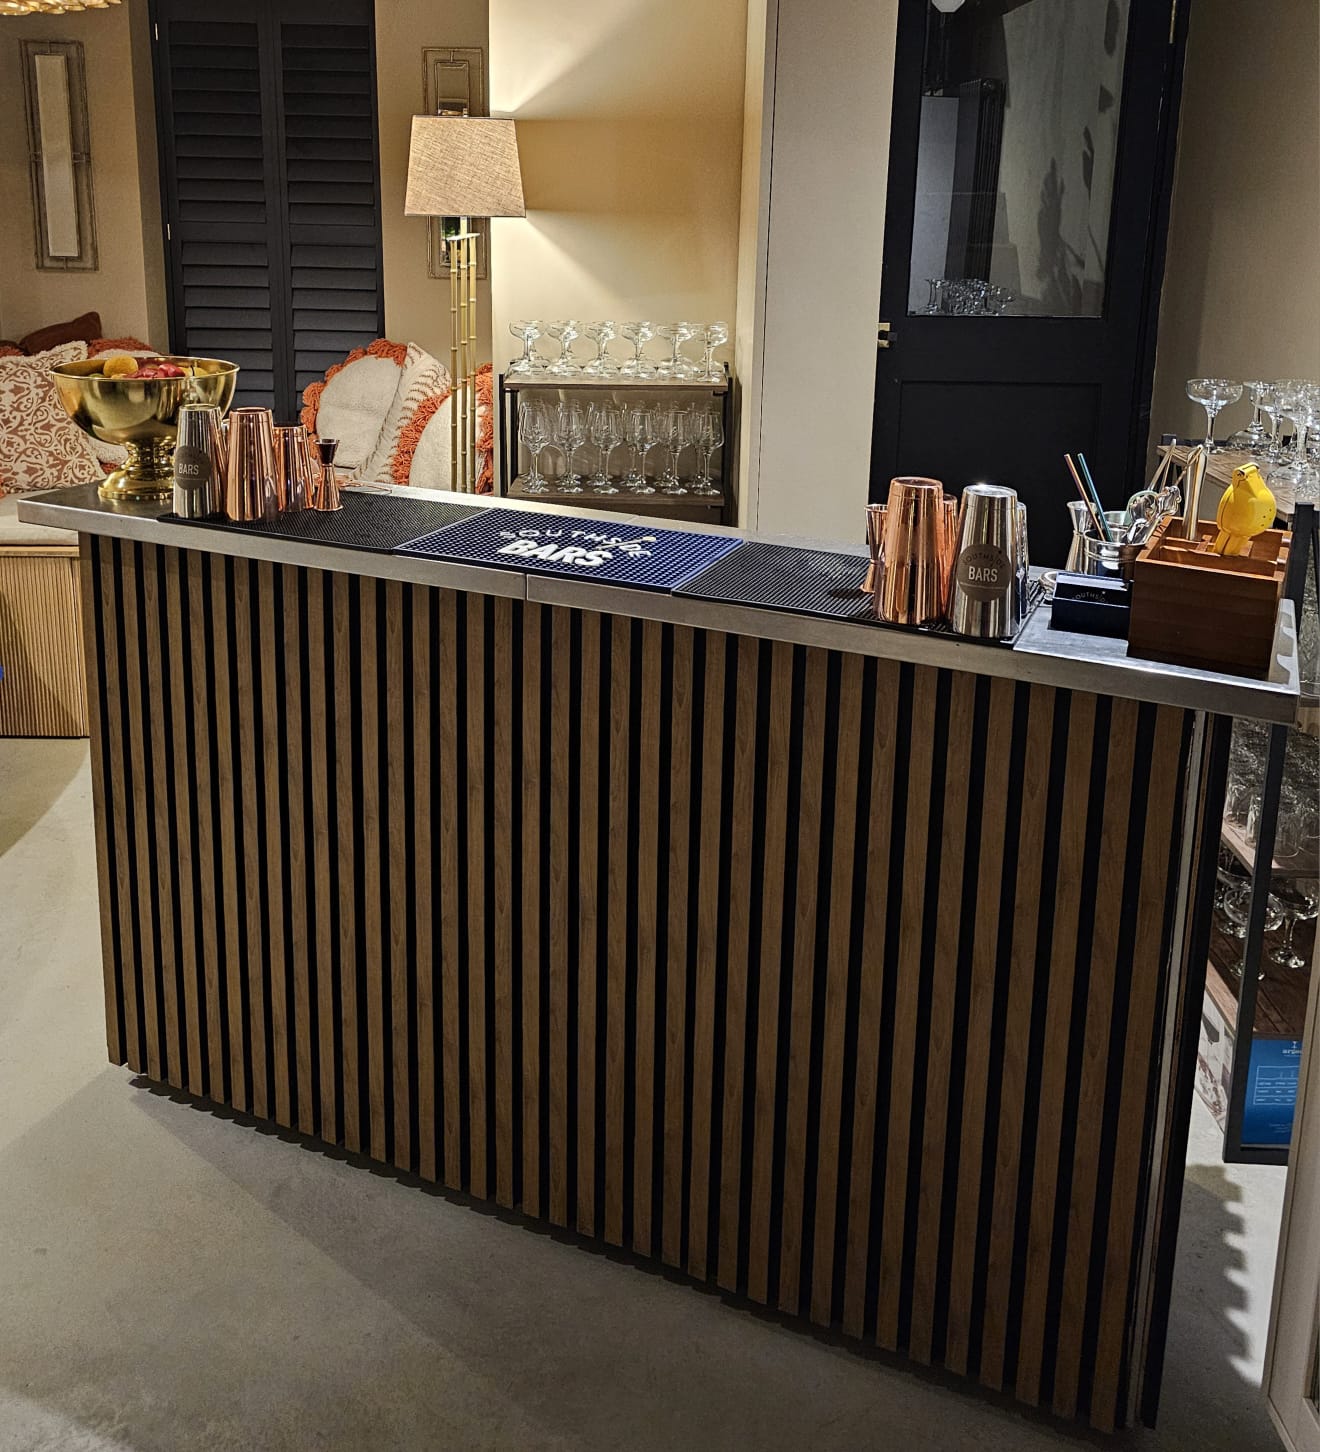 Portable cocktail bar in house that has been hire for an event.